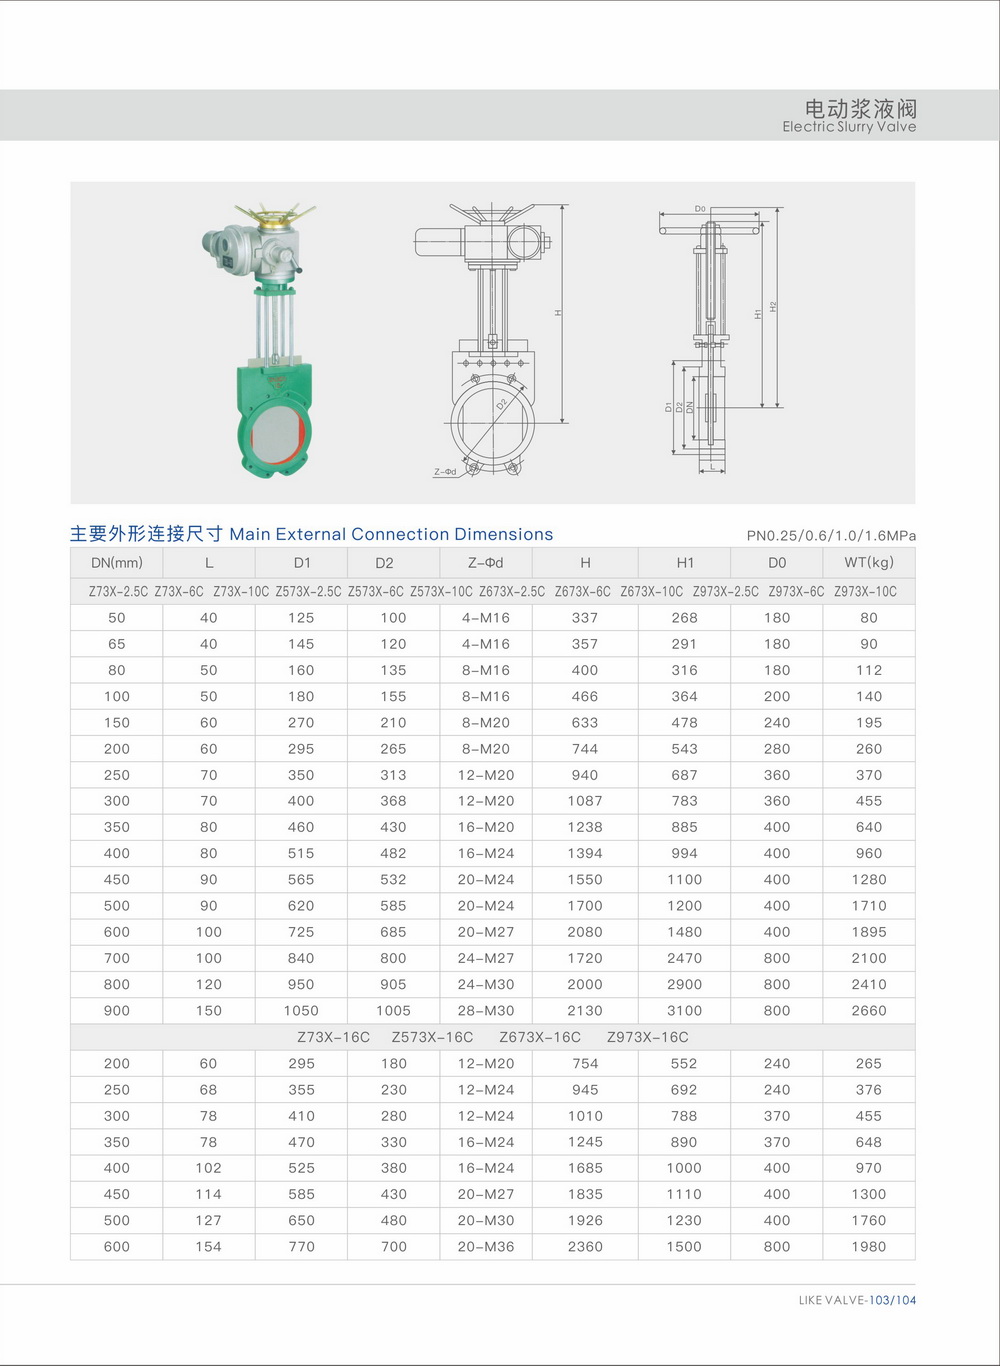 Chinese Electric Slurry Valve: Innovative Solution for Industrial Fluid Control